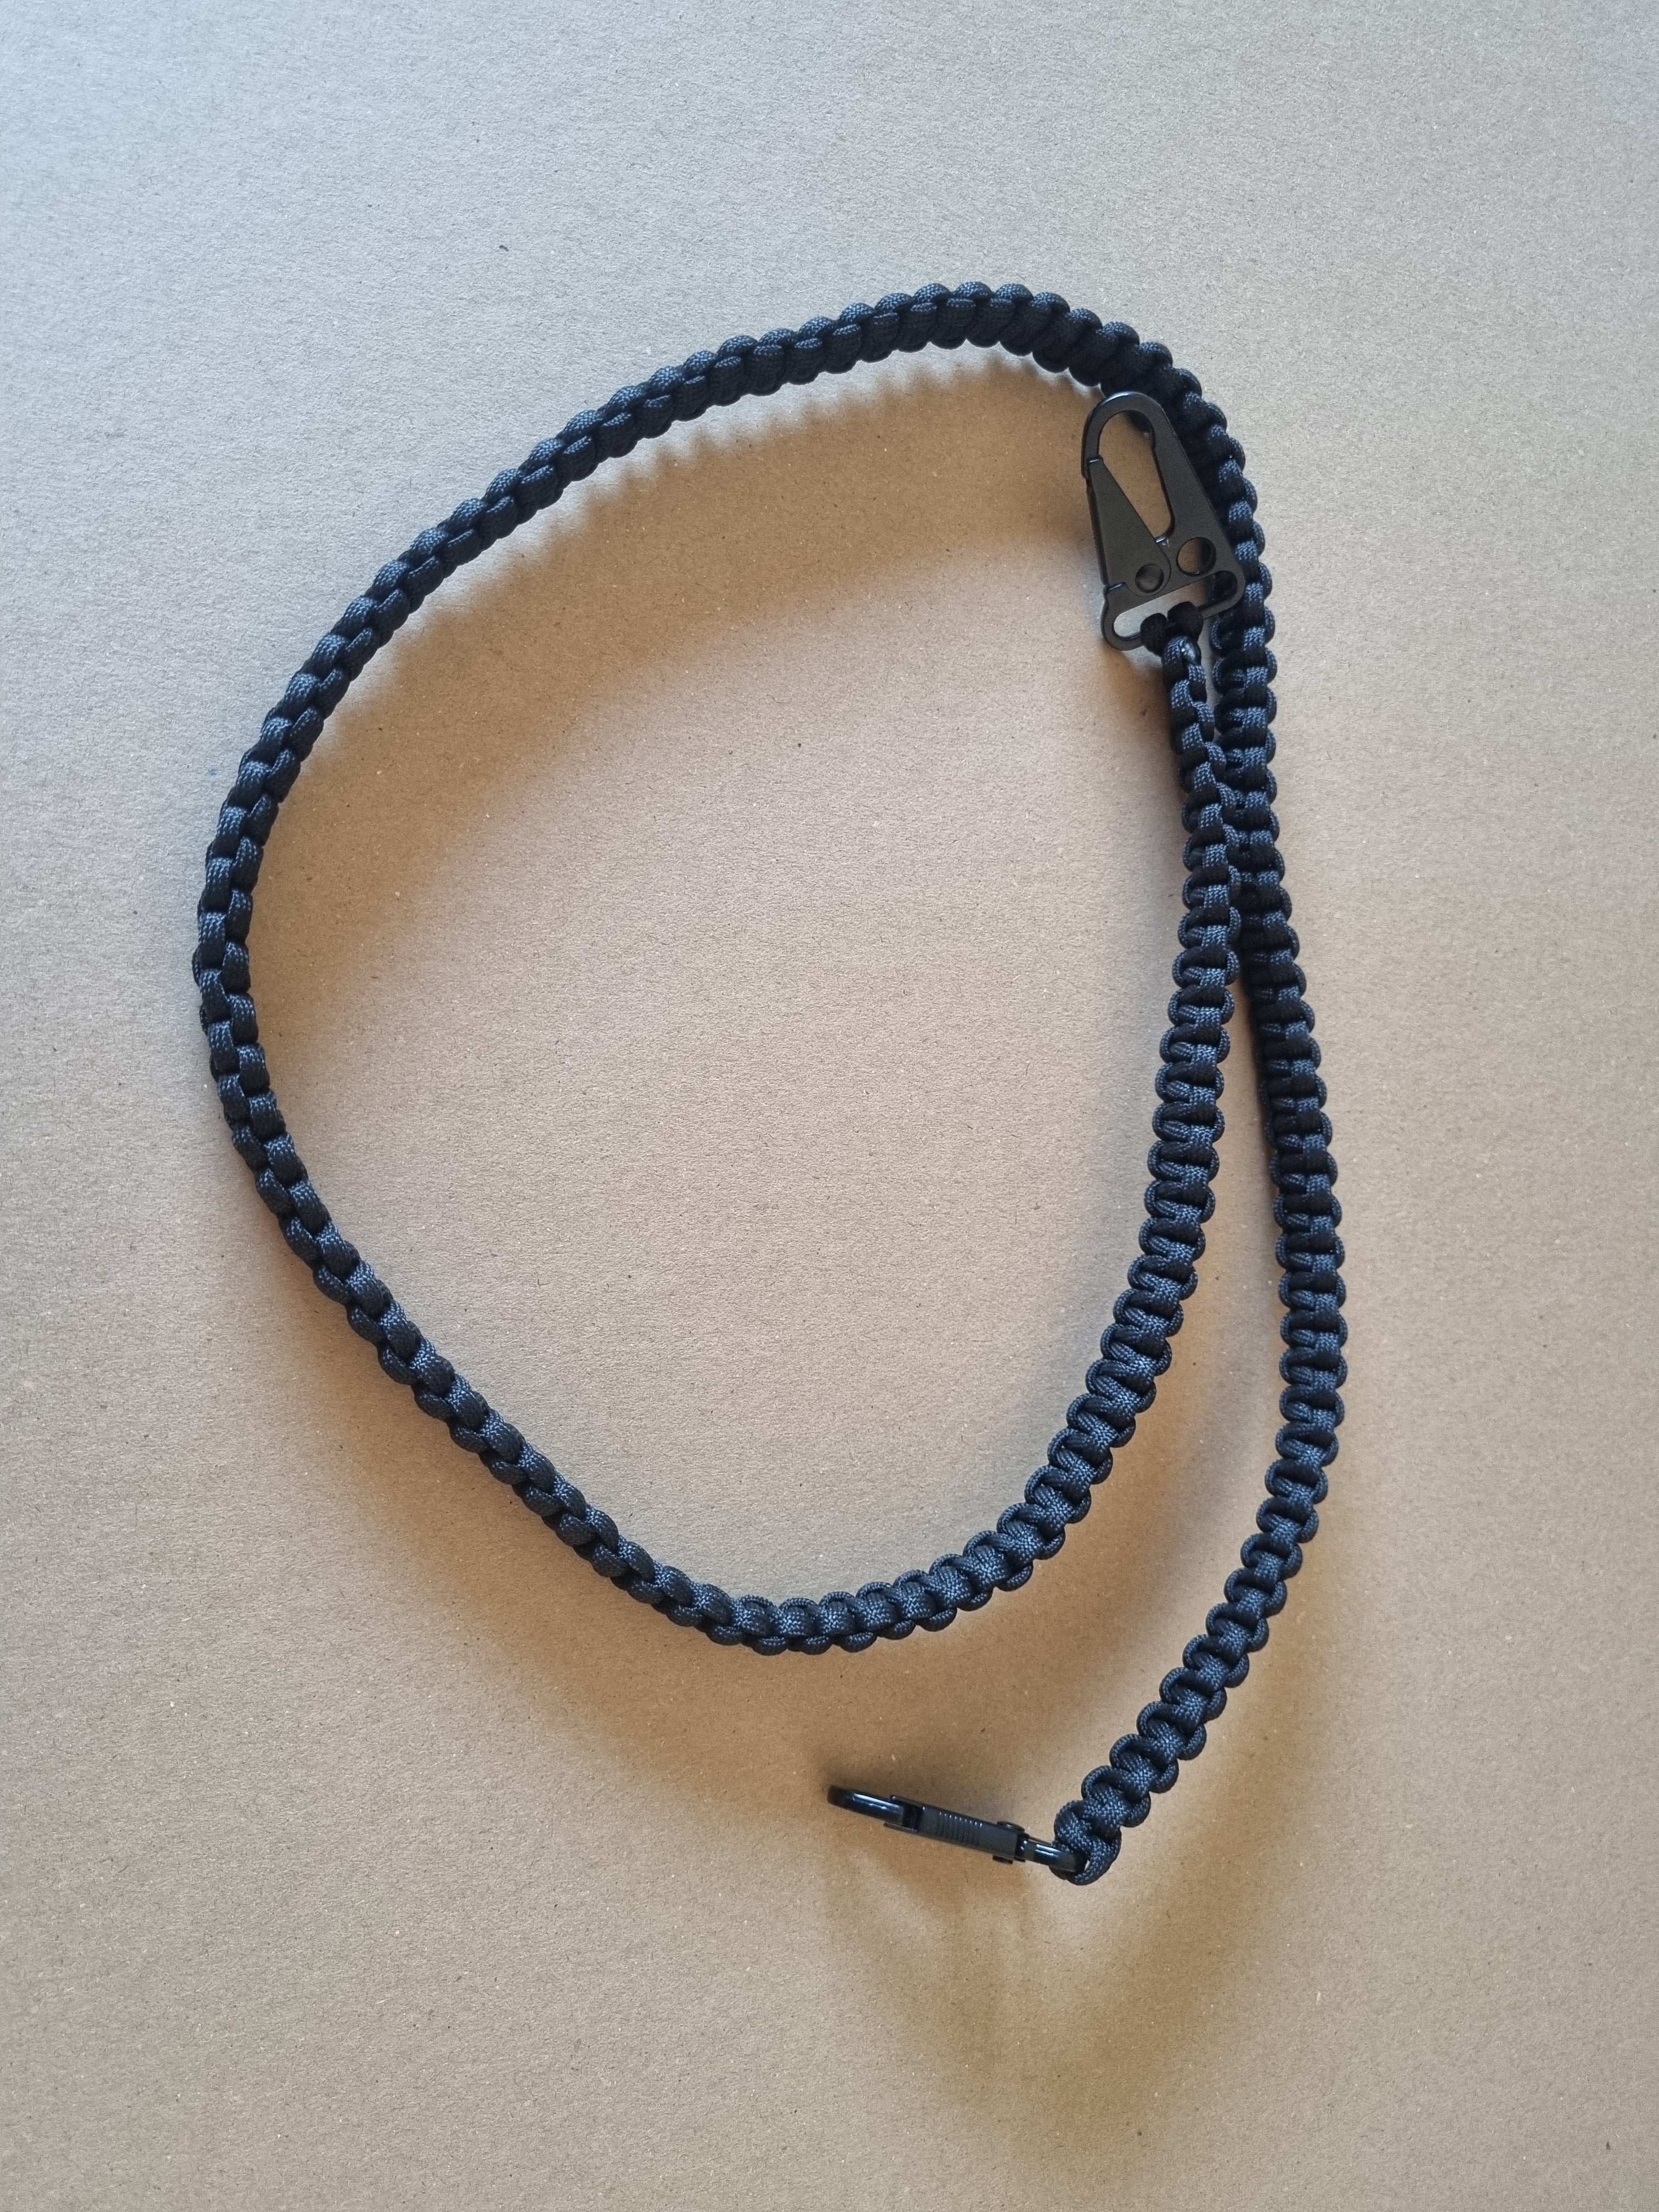 Handmade Paracord 2 Point Sling